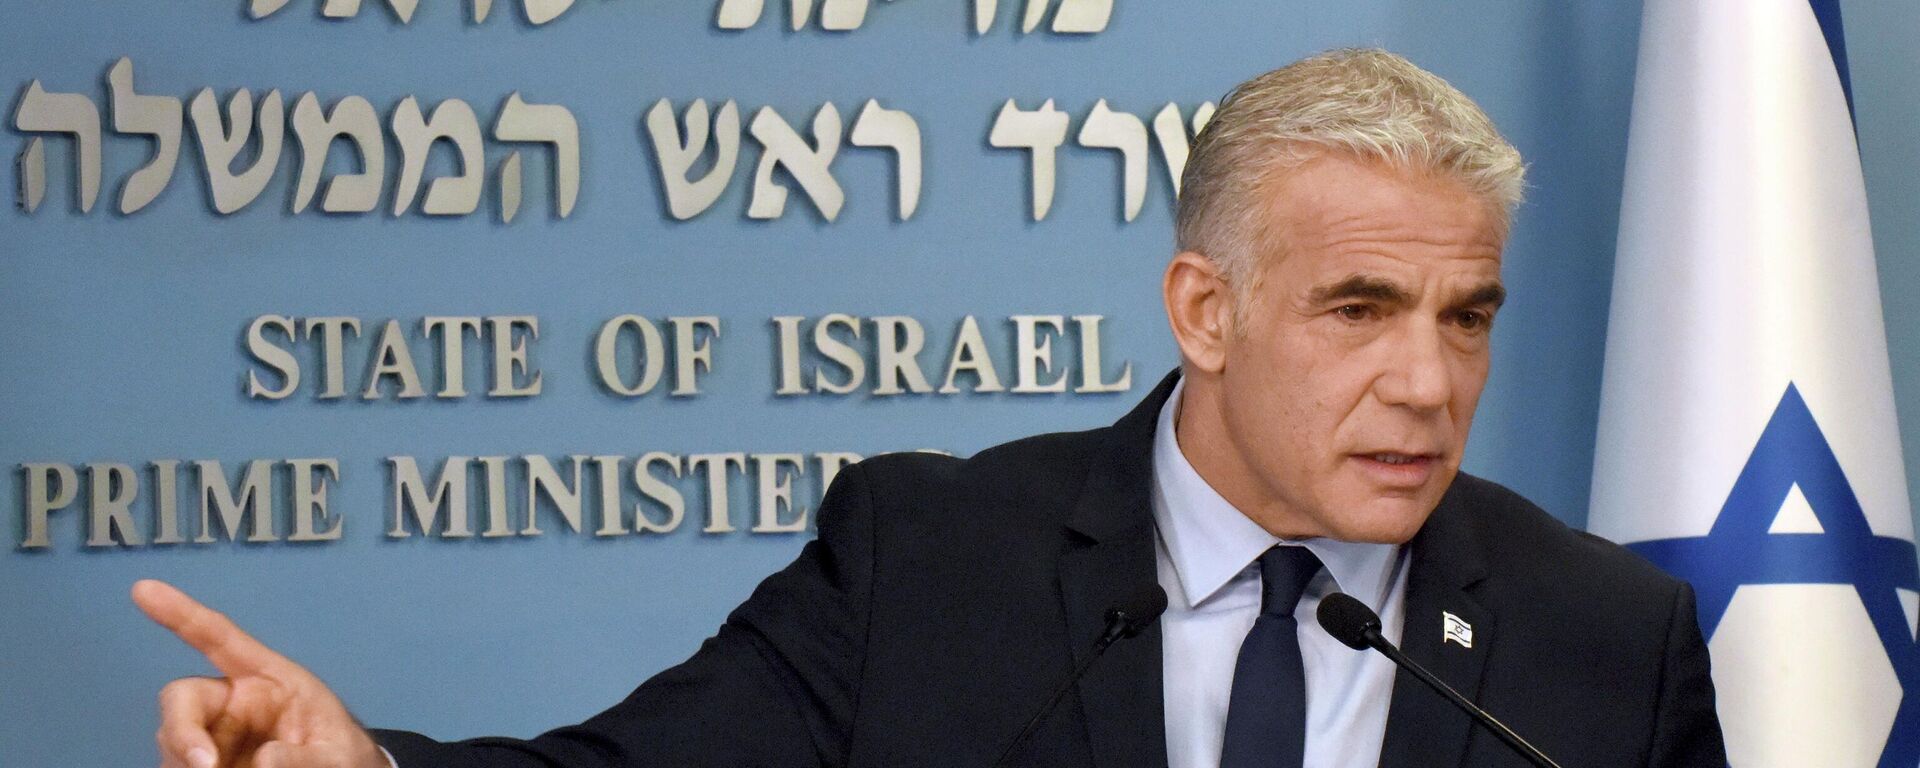 Israeli Prime Minister Yair Lapid speaks about Iran at a security briefing for the foreign press at the Prime Minister's office in Jerusalem, Wednesday, Aug. 24, 2022. Lapid called on U.S. President Joe Biden and Western powers to call off an emerging nuclear deal with Iran, saying an agreement would fail to prevent Iran from developing a nuclear bomb and reward it with billions of dollars to fund Israel's enemies. Israel's caretaker prime minister used stark language on Wednesday in his criticism of the expected agreement. (Debbie Hill/Pool via AP) - Sputnik International, 1920, 04.09.2022